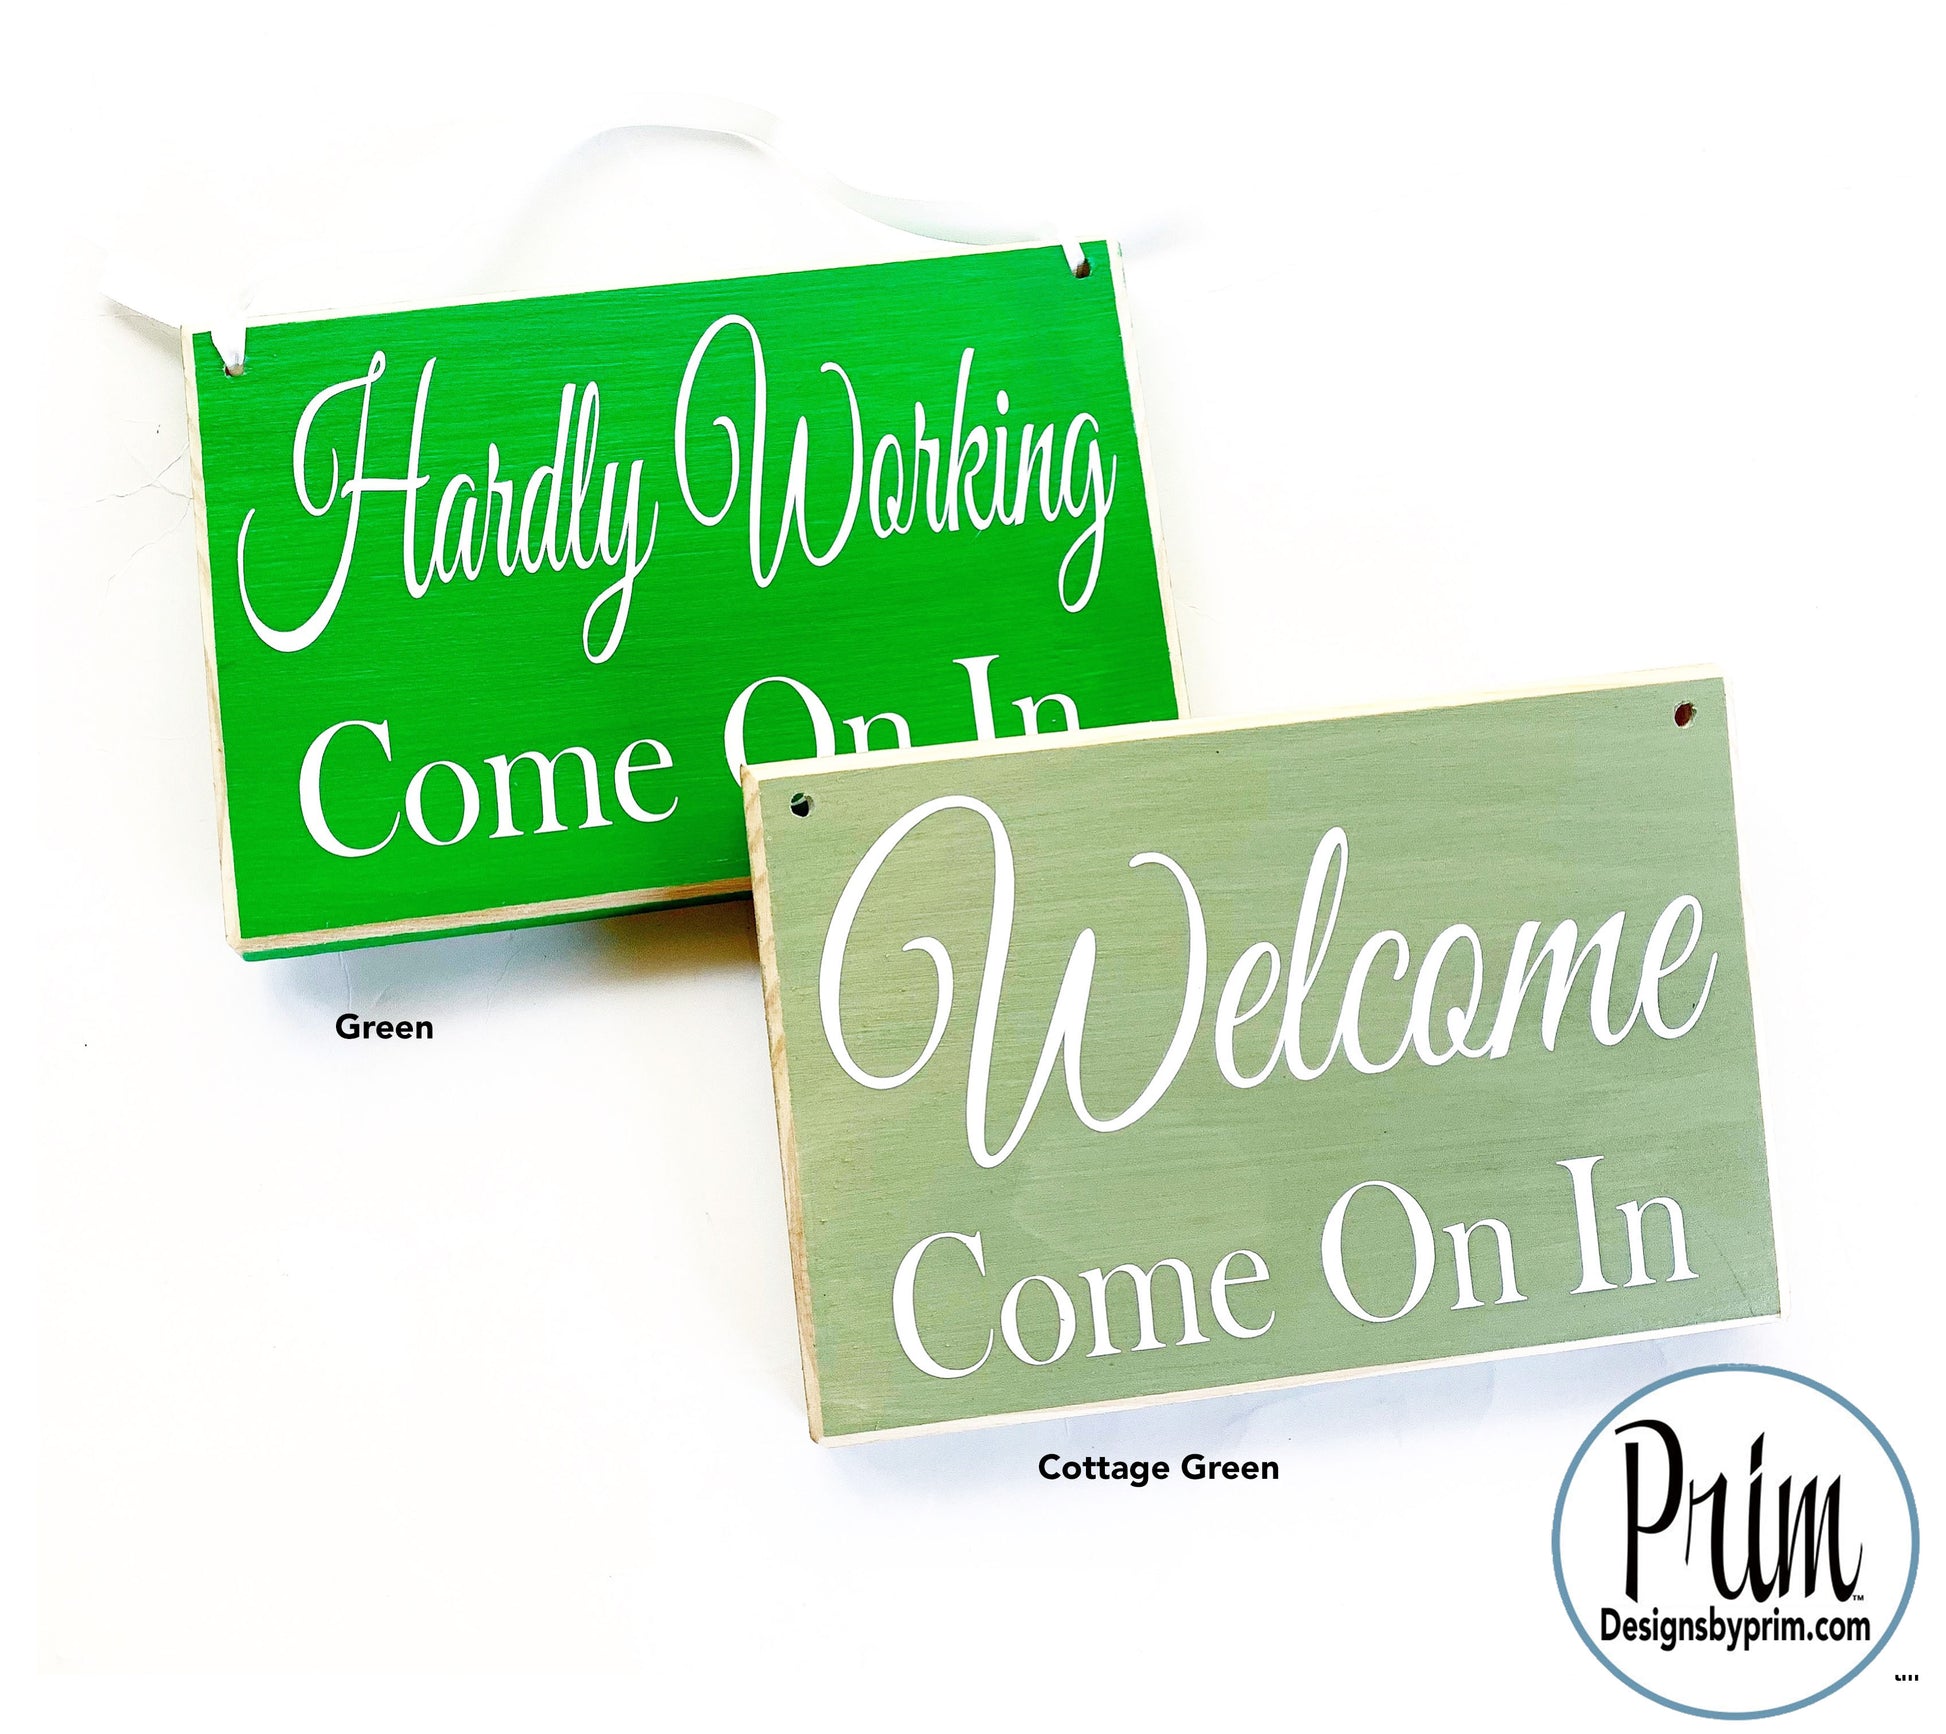 Designs by Prim Custom Wood Signs Color Chart Green